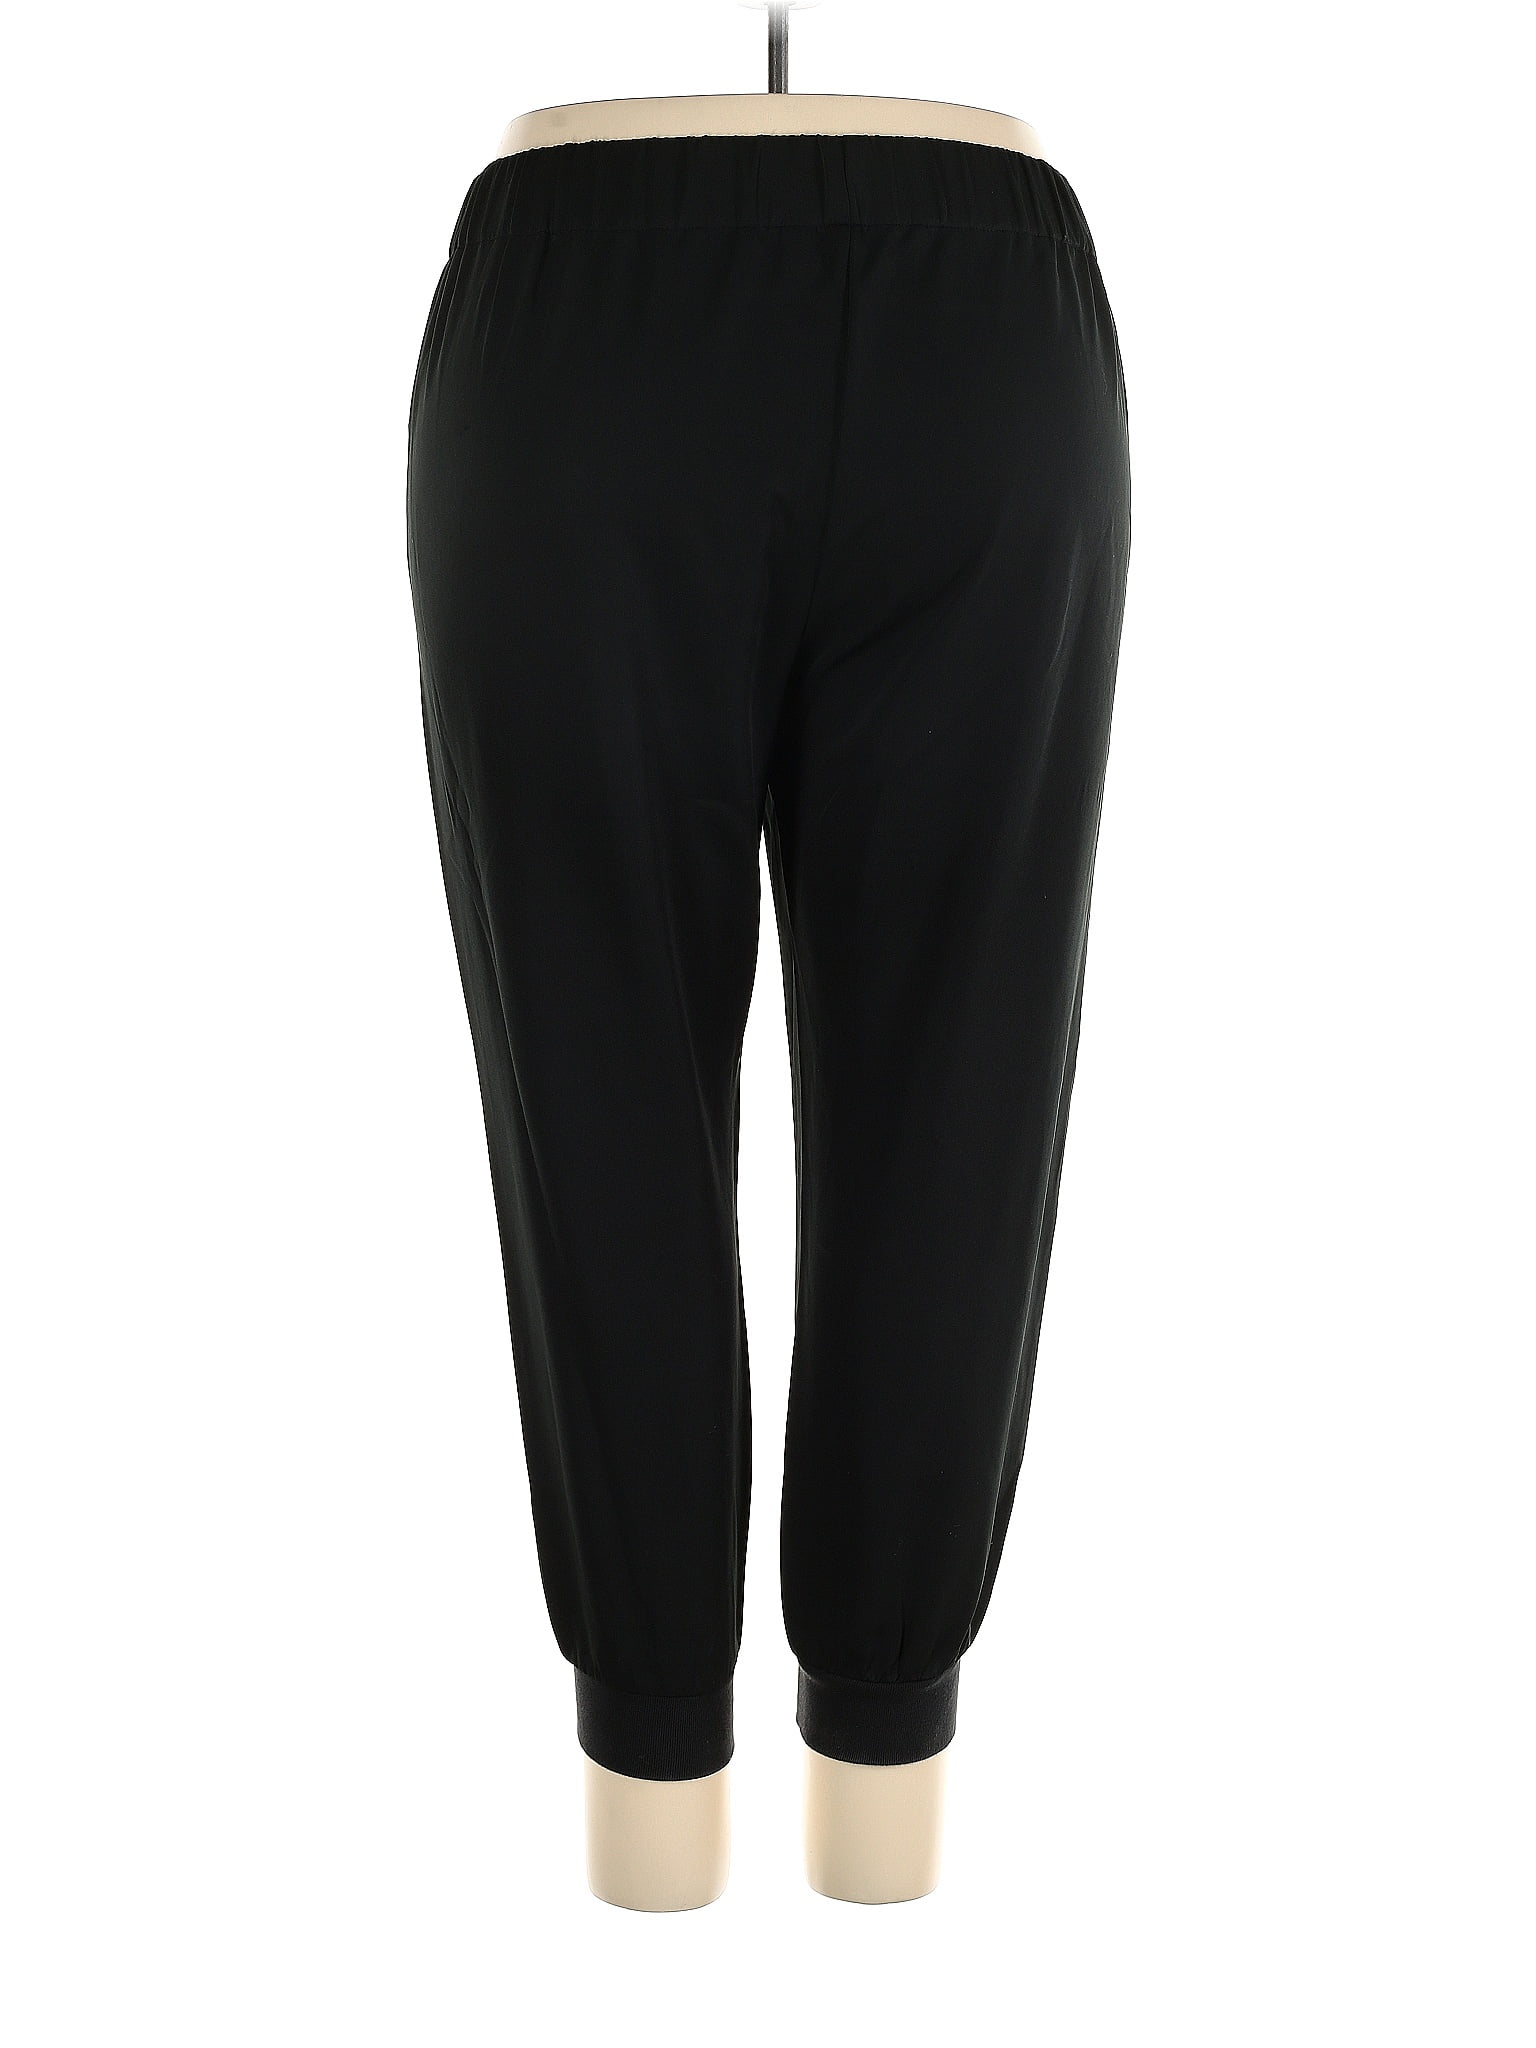 prologue Solid Black Casual Pants Size XXL - 47% off